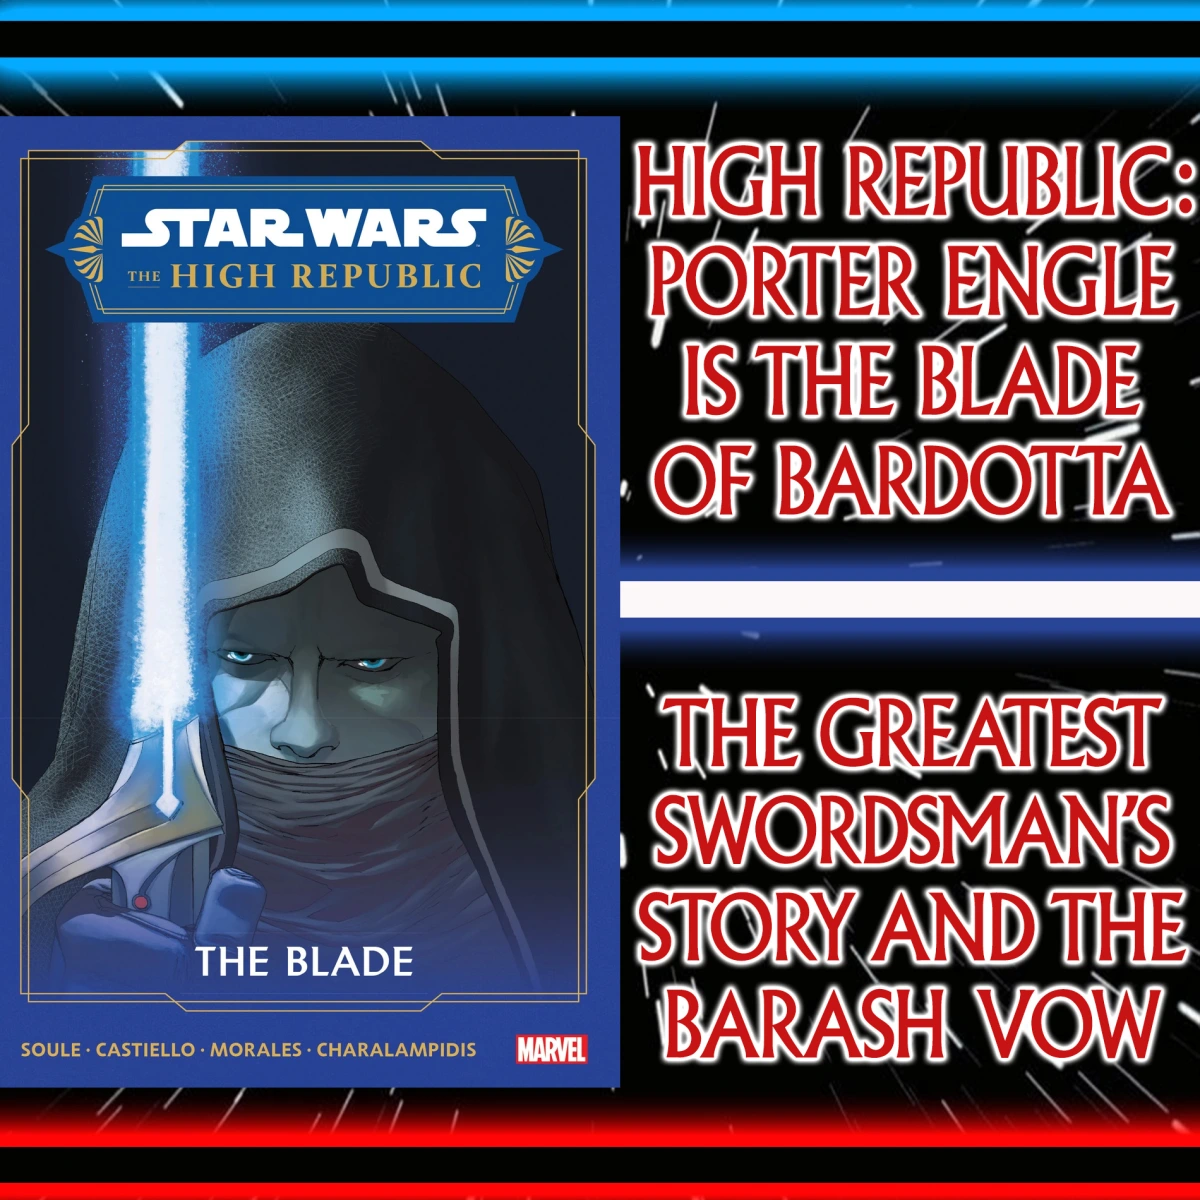 Star Wars: Comics In Motion – Porter Engle Is The Blade Of Bardotta: The Greatest Swordsman’s Origin Story, His Sister And The Barash Vow (The Blade #1-4) – High Republic Phase 2, Wave 1 – Ep 130